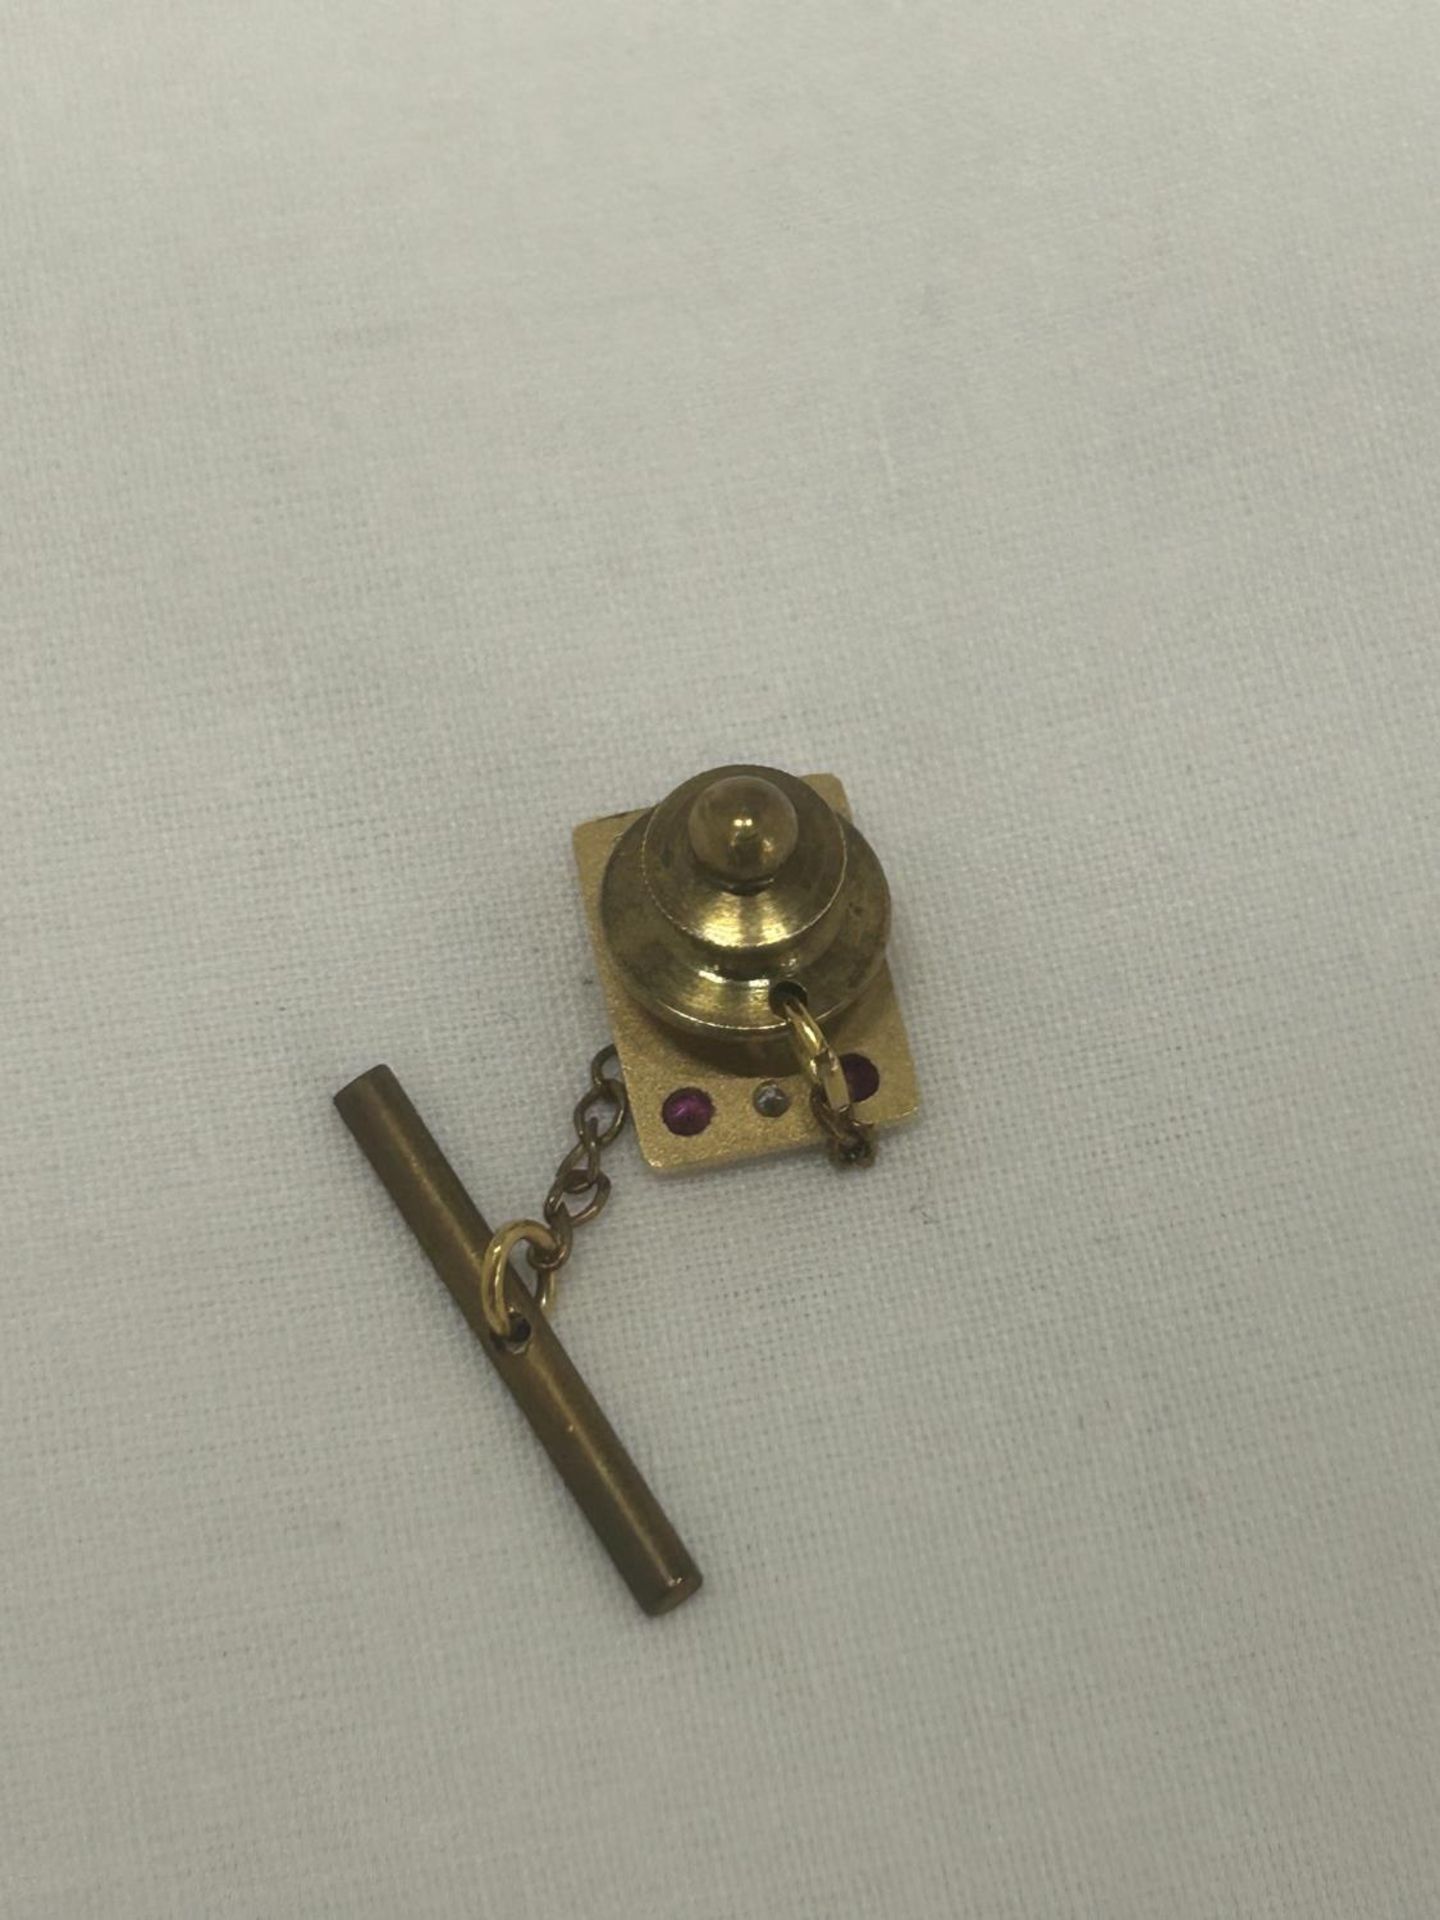 A HALLMARKED 9CT GOLD DIAMOND AND RUBY 'FODEN' PIN BADGE GROSS WEIGHT 4.84G - Image 4 of 4